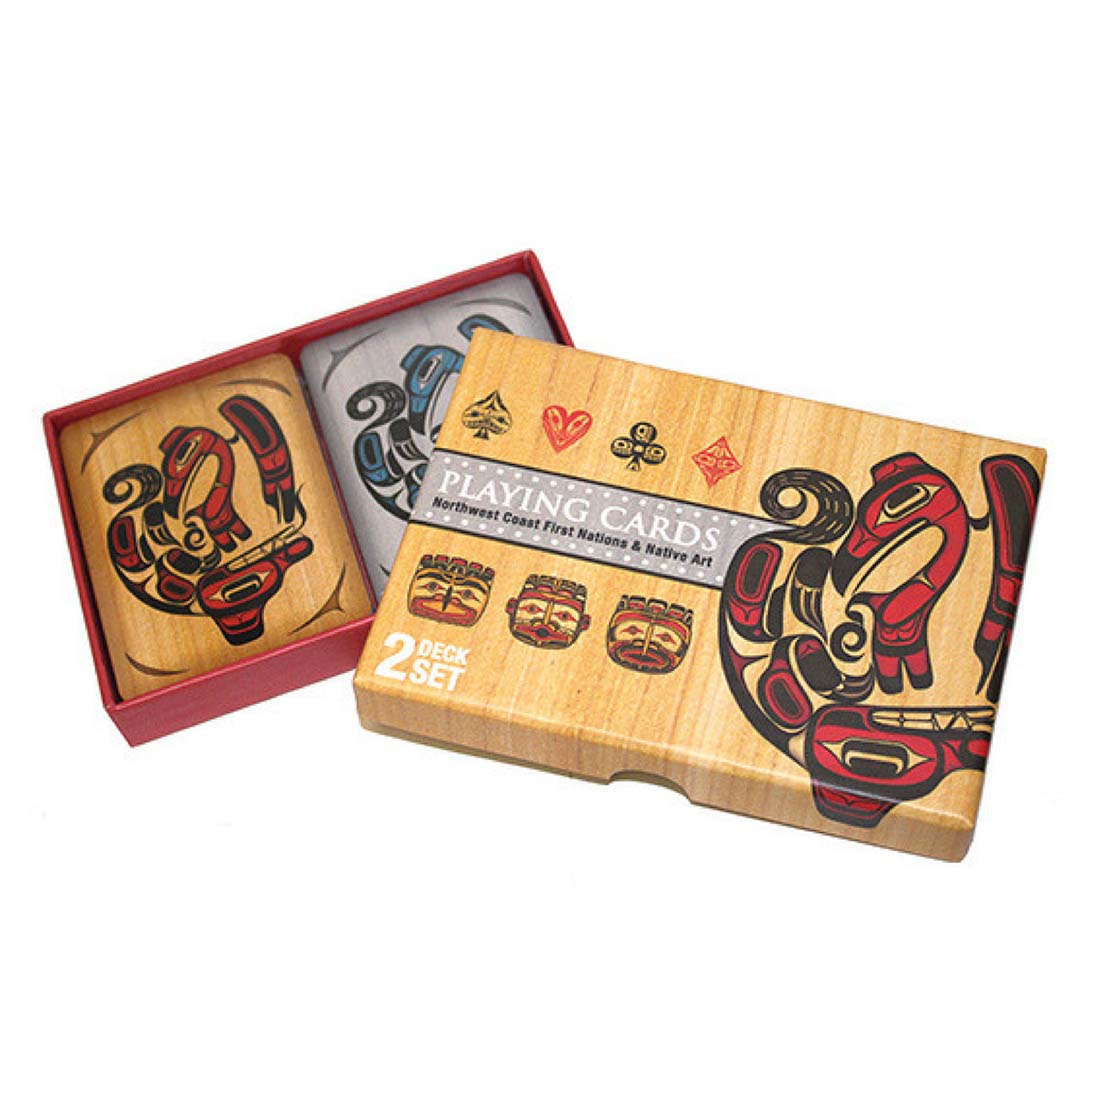 Northwest Coast First Nations &amp; Native Art Two Deck Playing Cards